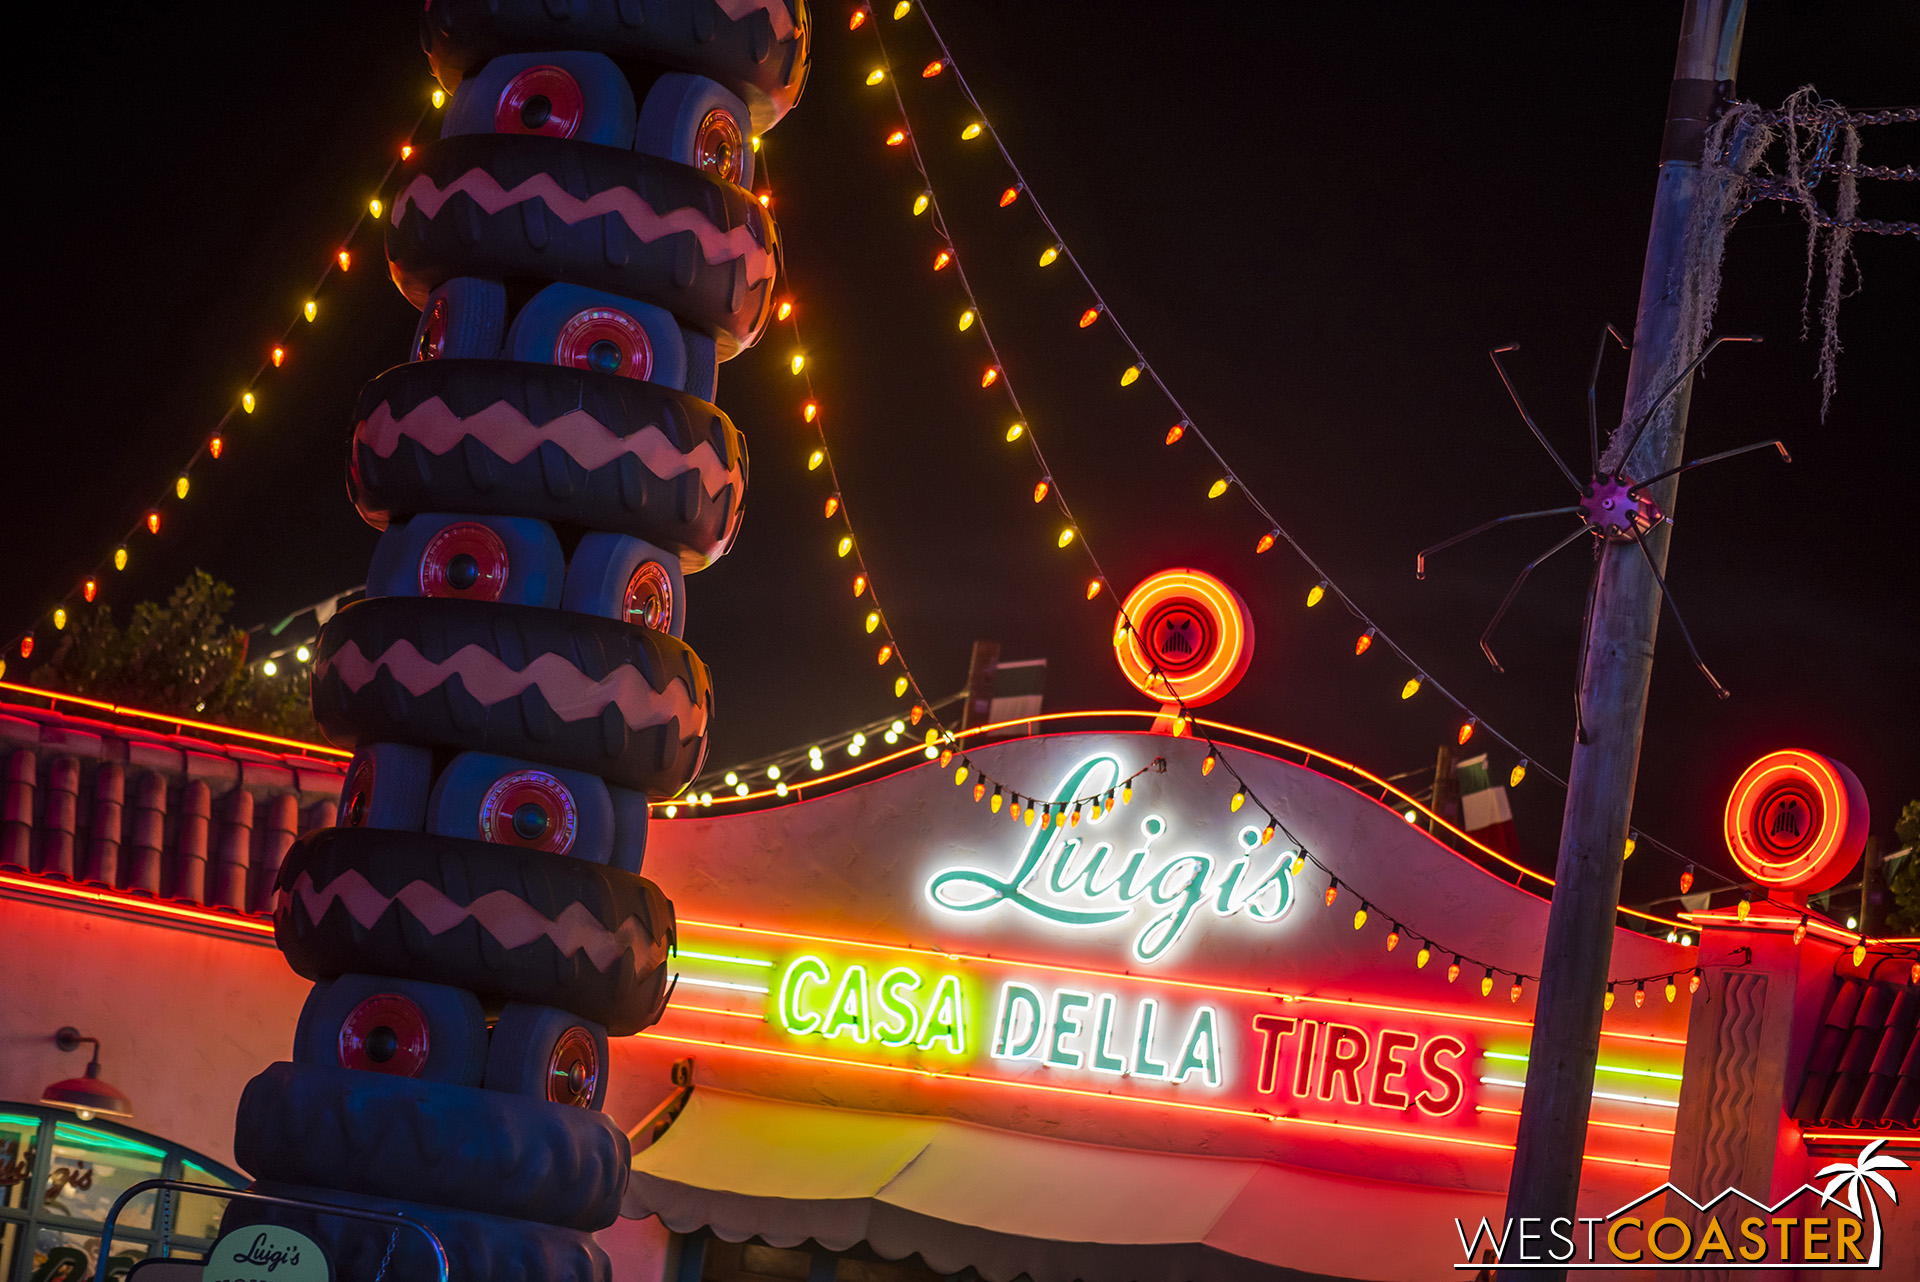  Luigi’s Leaning Tower of Tires could use some color sprucing. 